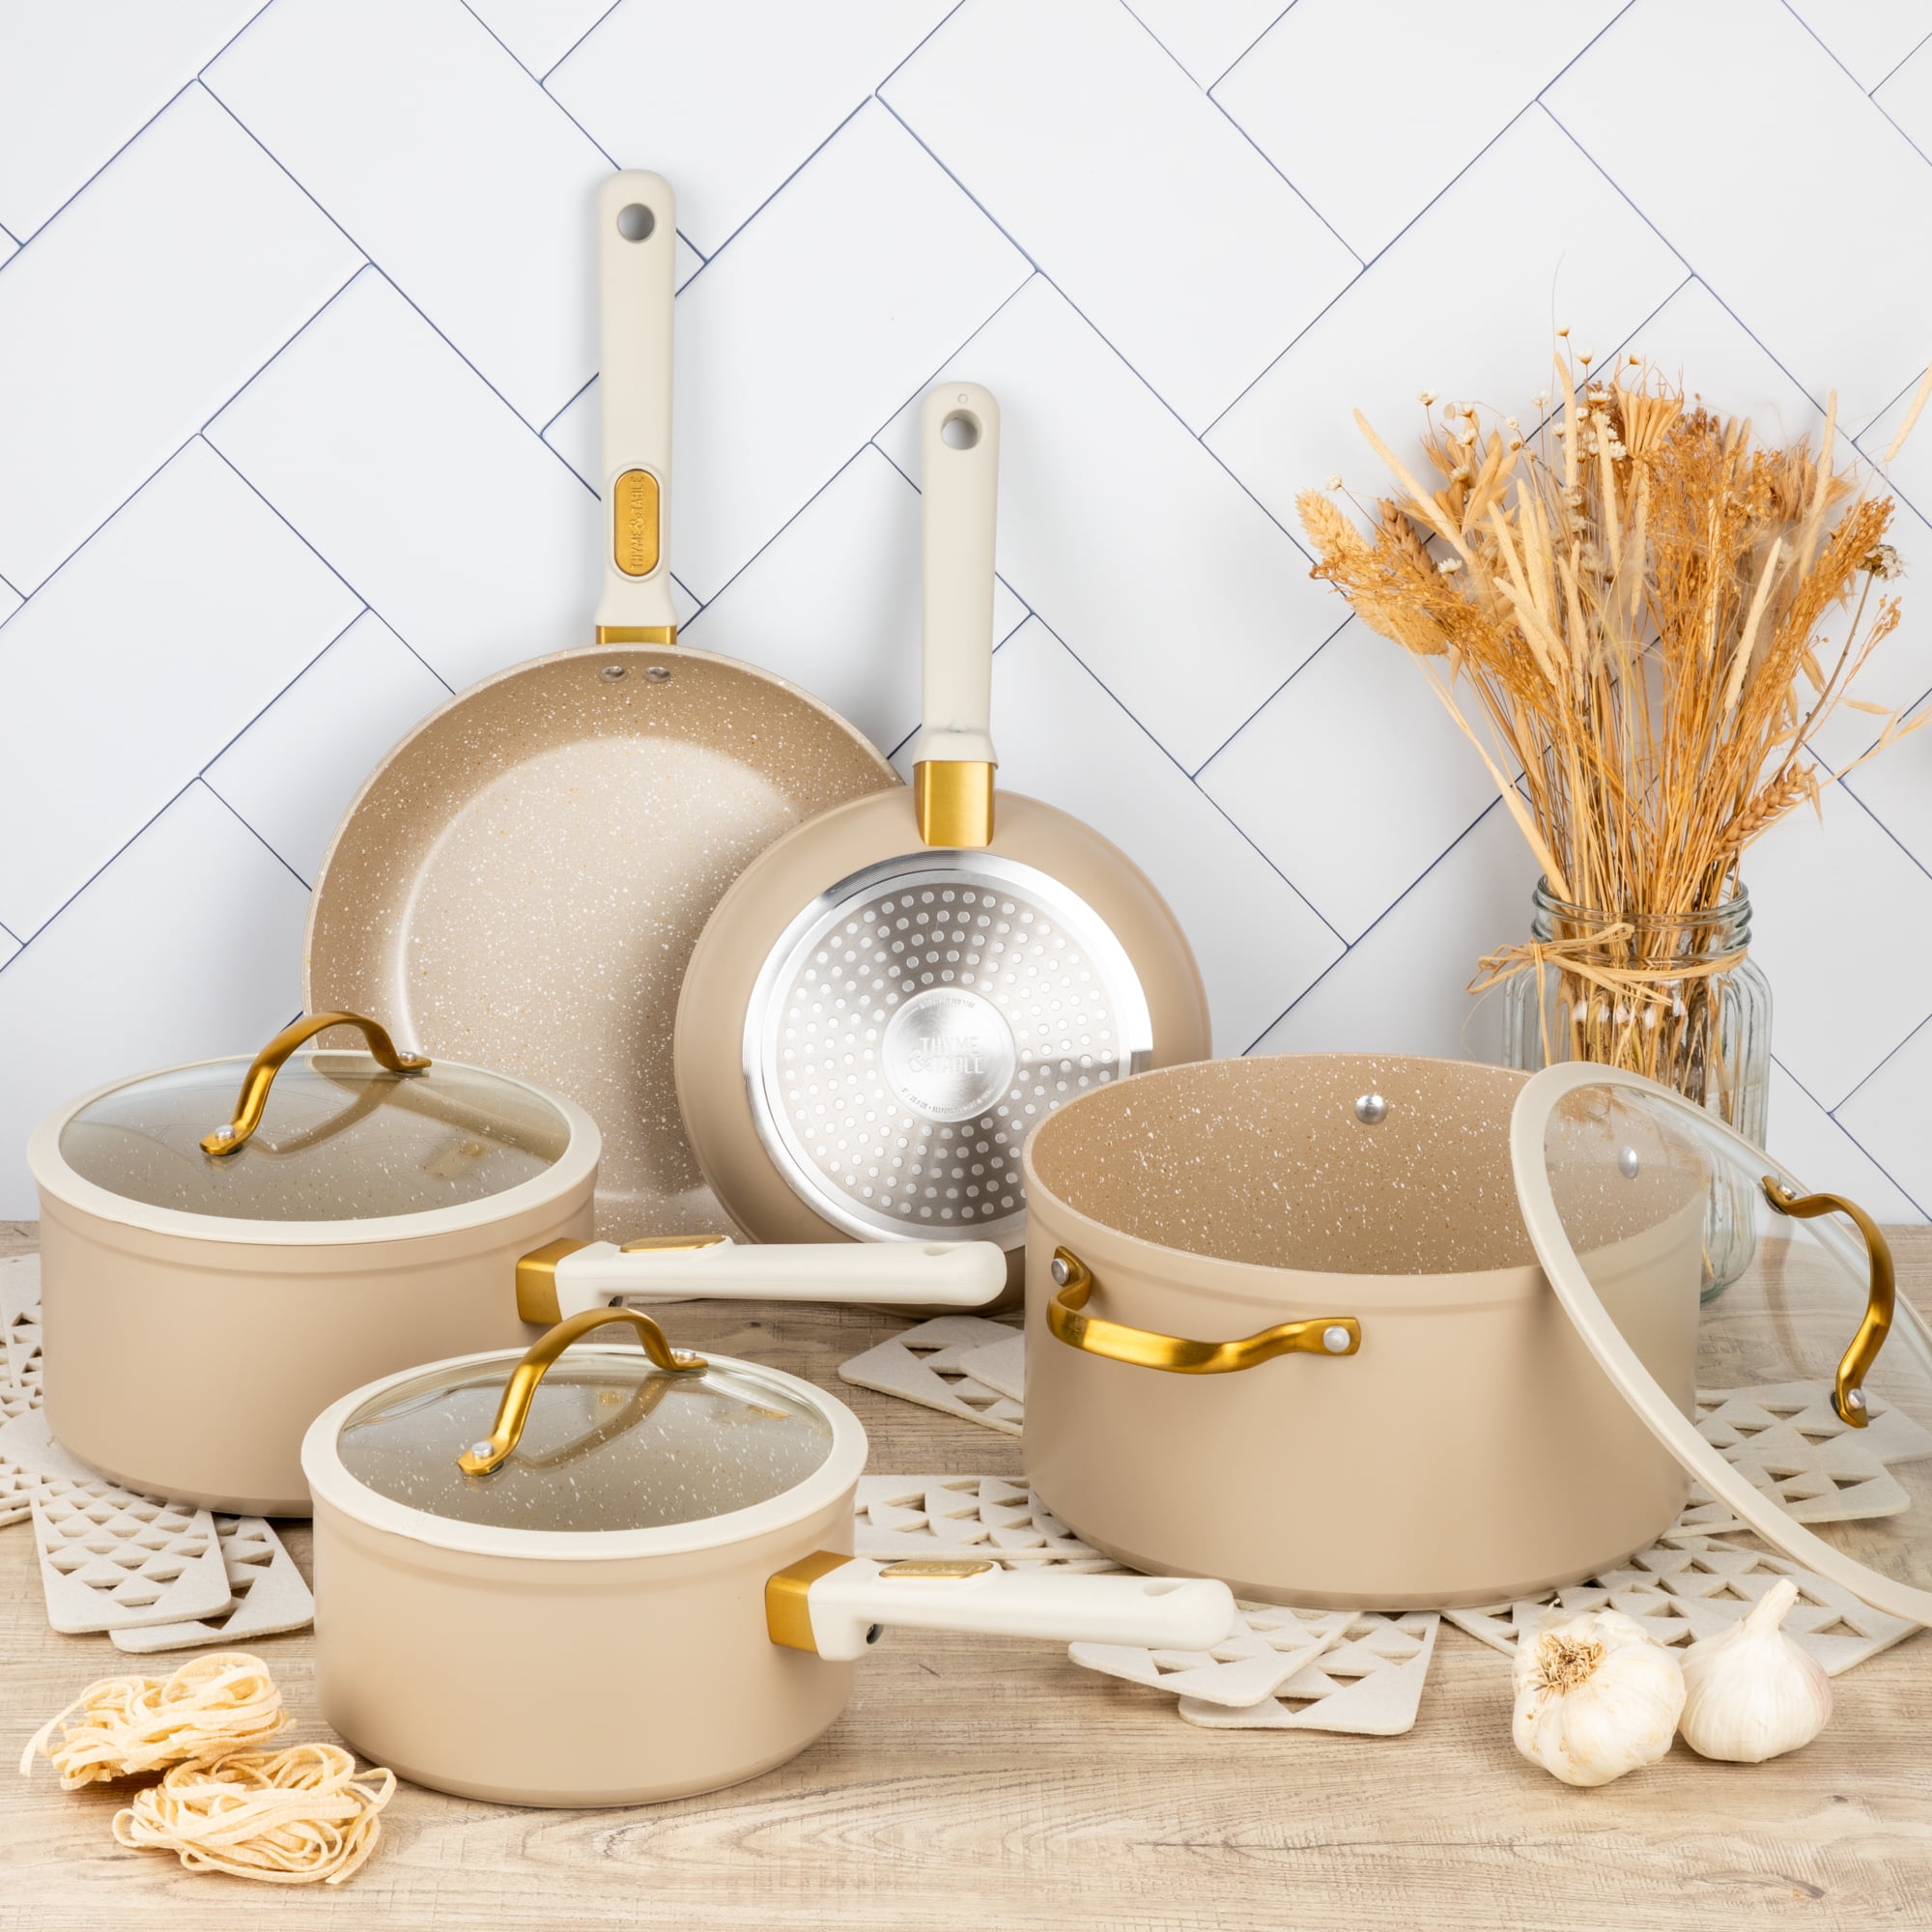 New at Walmart: Thyme and Table Kitchenware - The Budget Babe